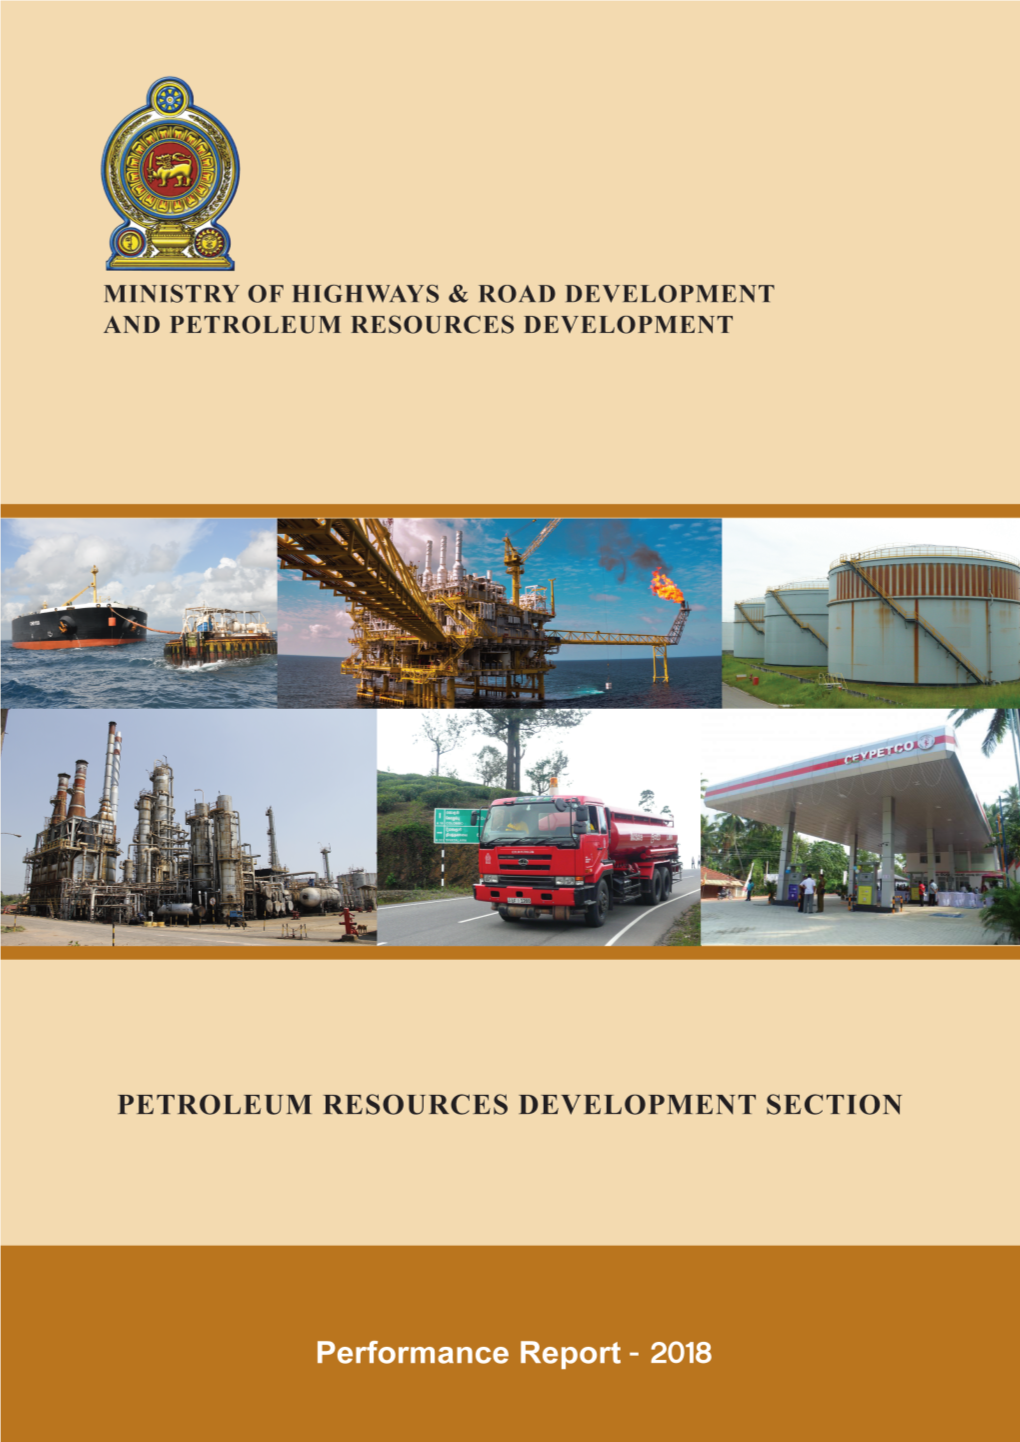 Performance-Report-Ministry-Of-Highways-Section-Of-Petroleum-Resources-Development